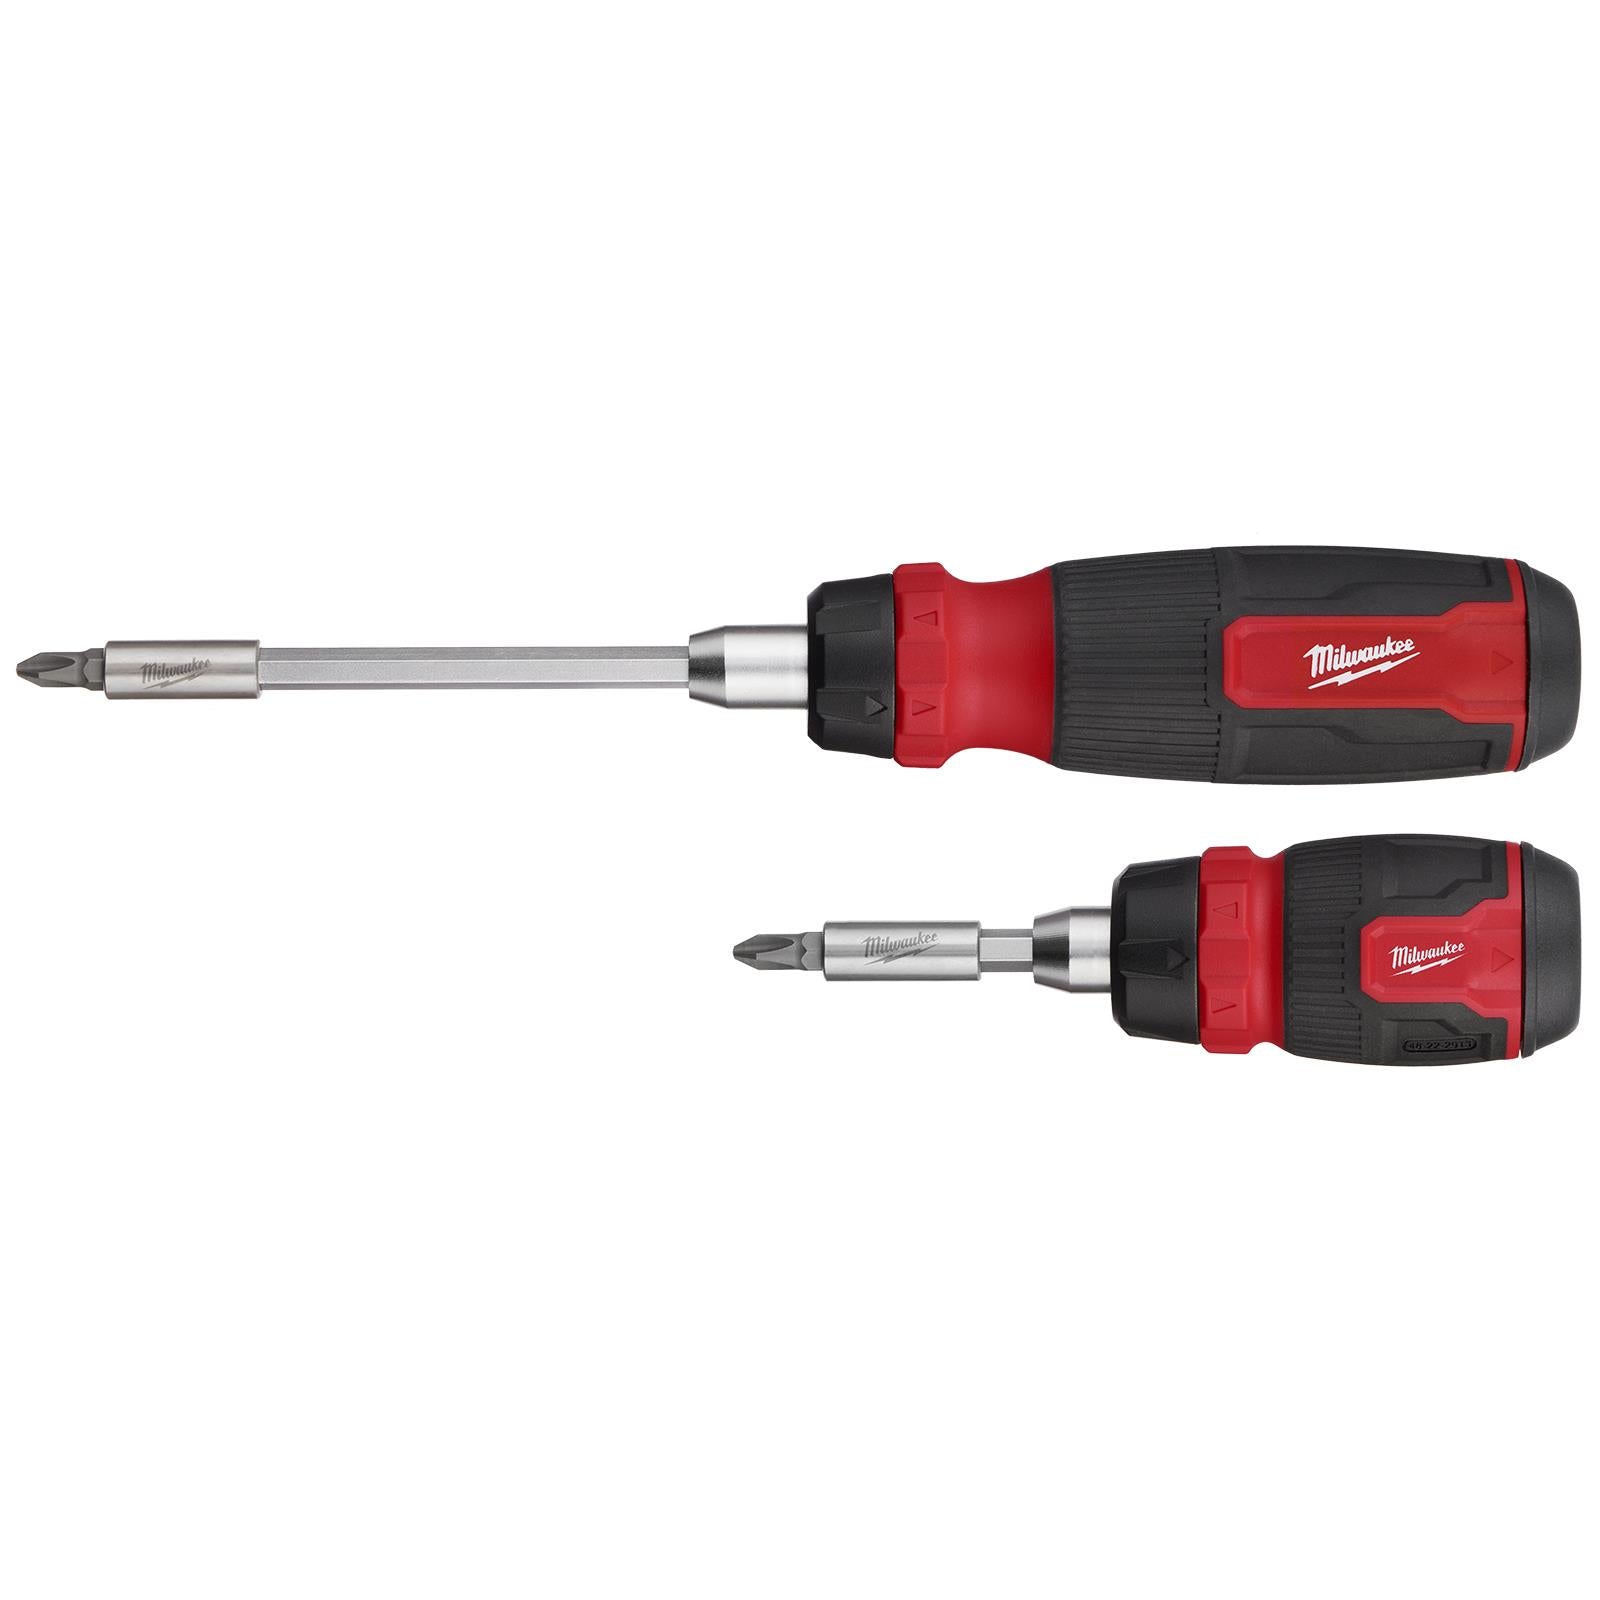 Milwaukee Ratchet Screwdriver Set Kit 2 Piece Compact 8 in 1 and Standard 14 in 1